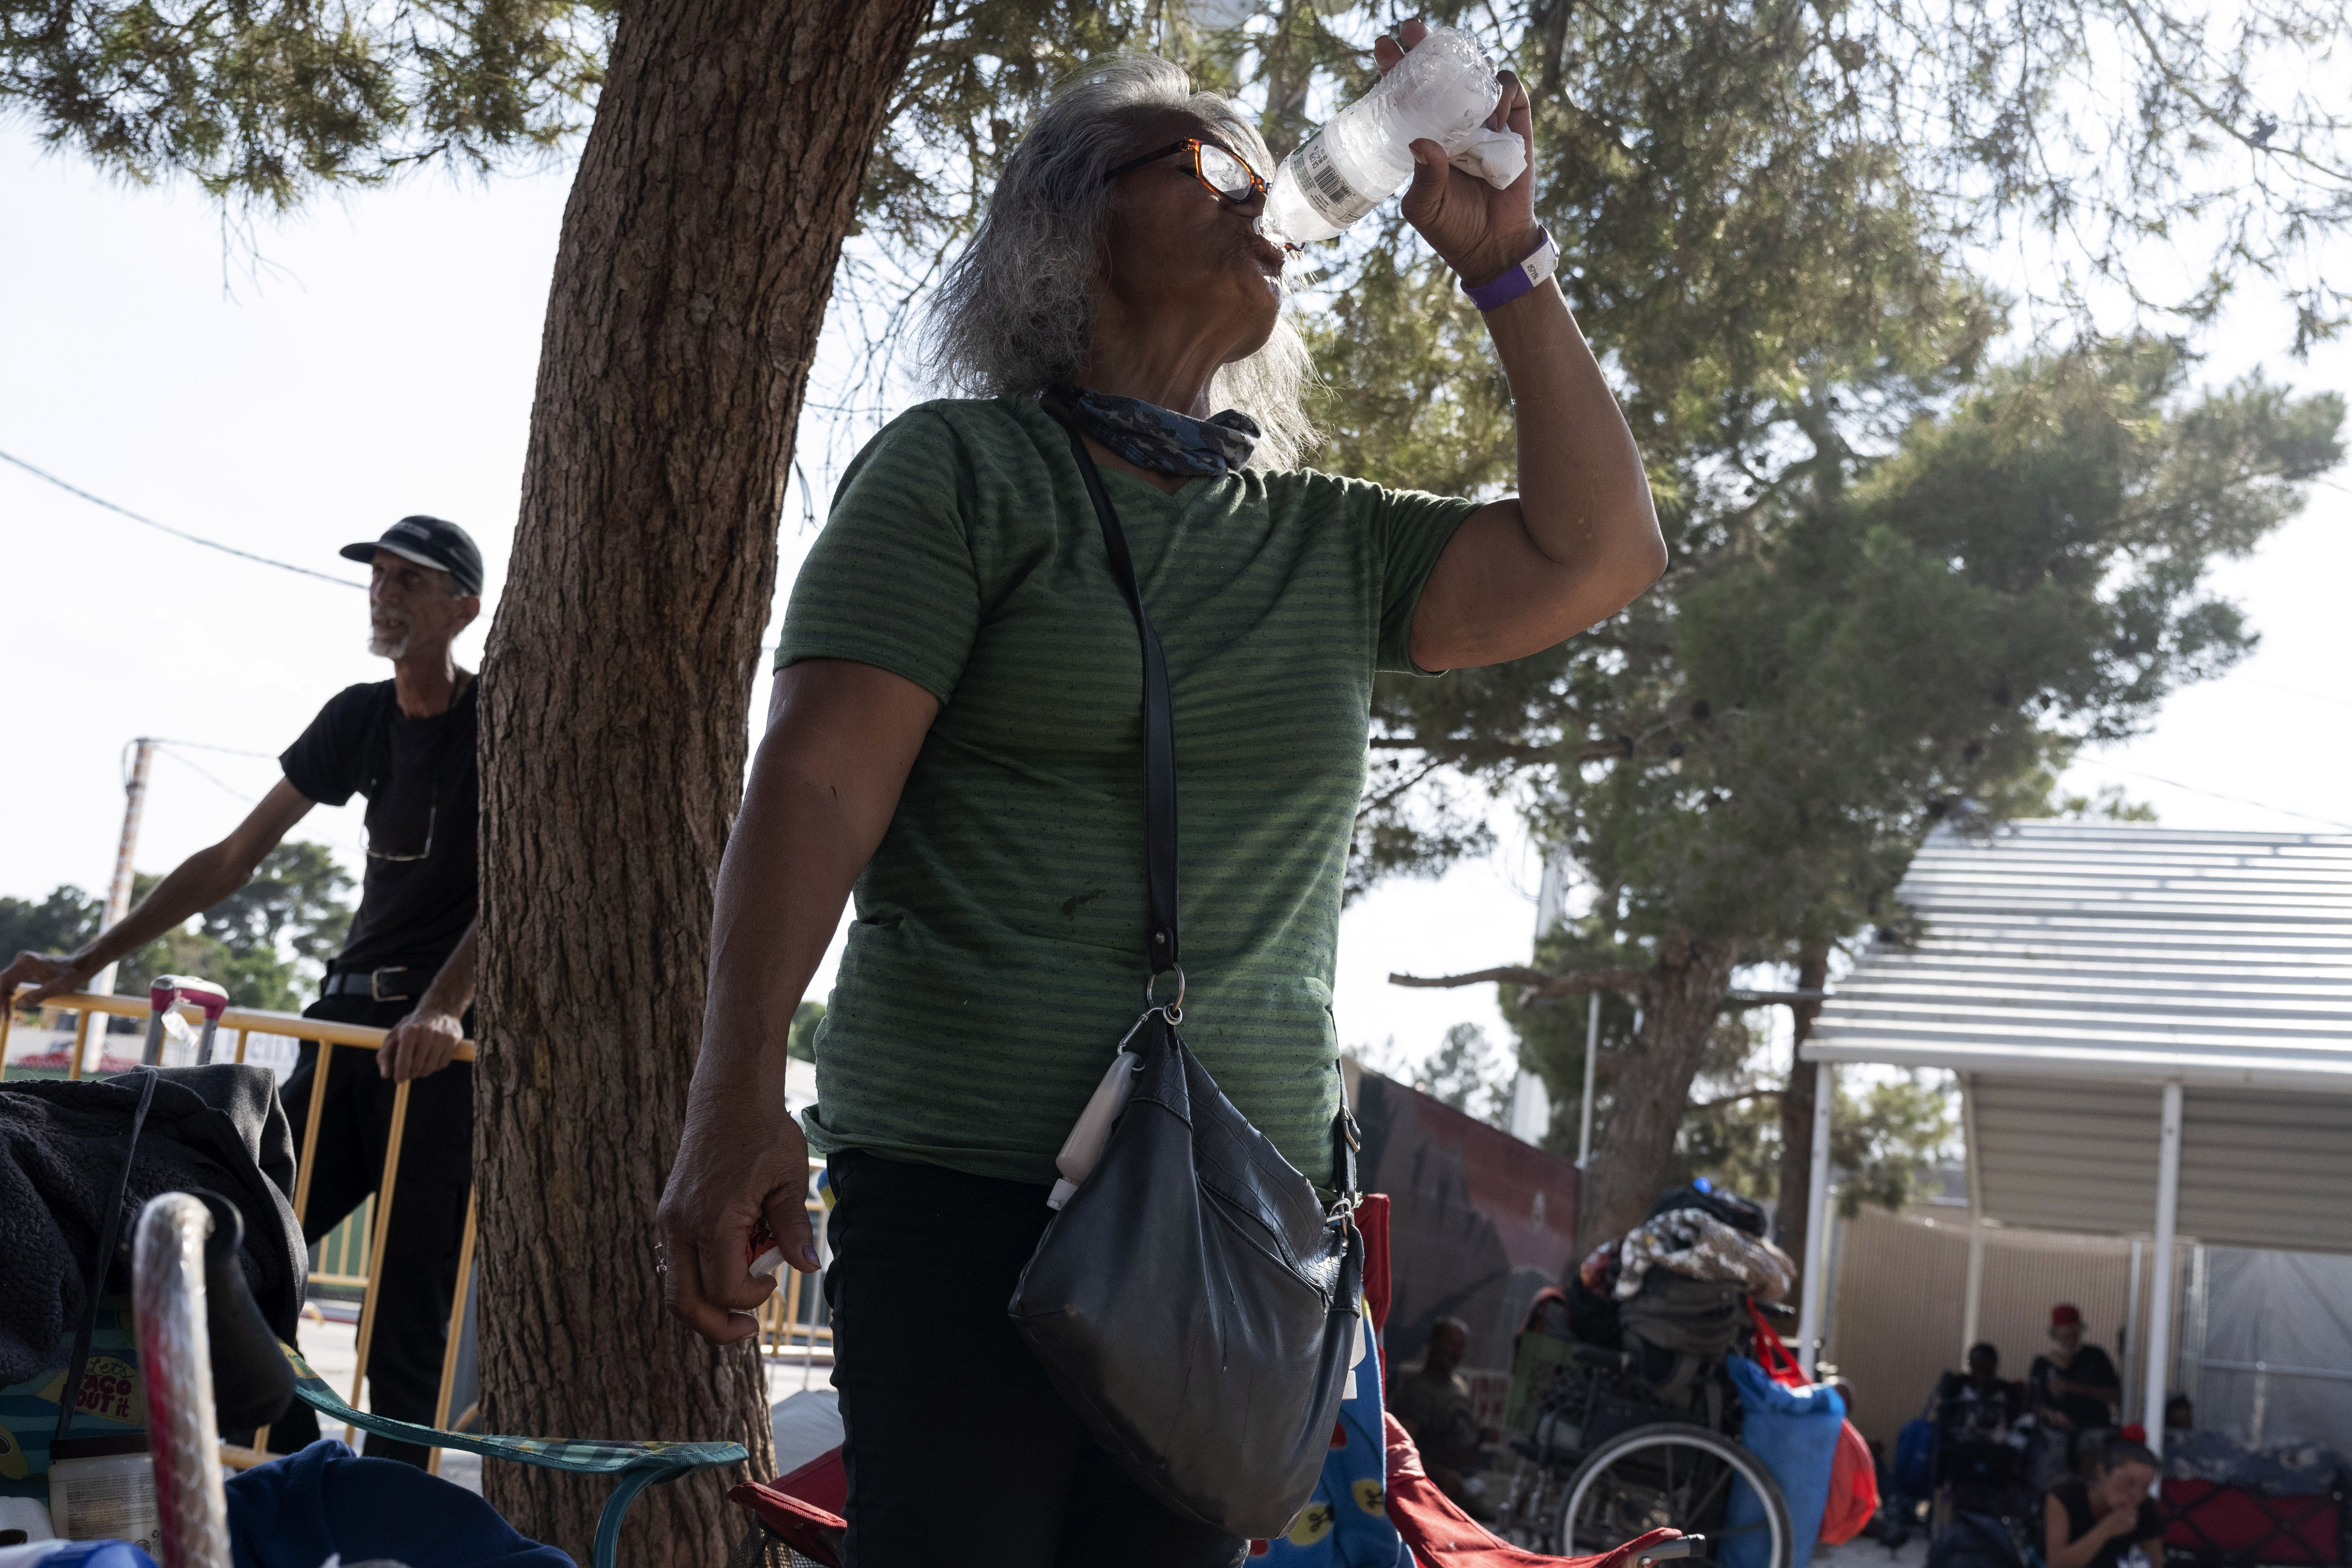 A person drinks cold water at a homeless resource center, in Las Vegas on June 16, 2021.